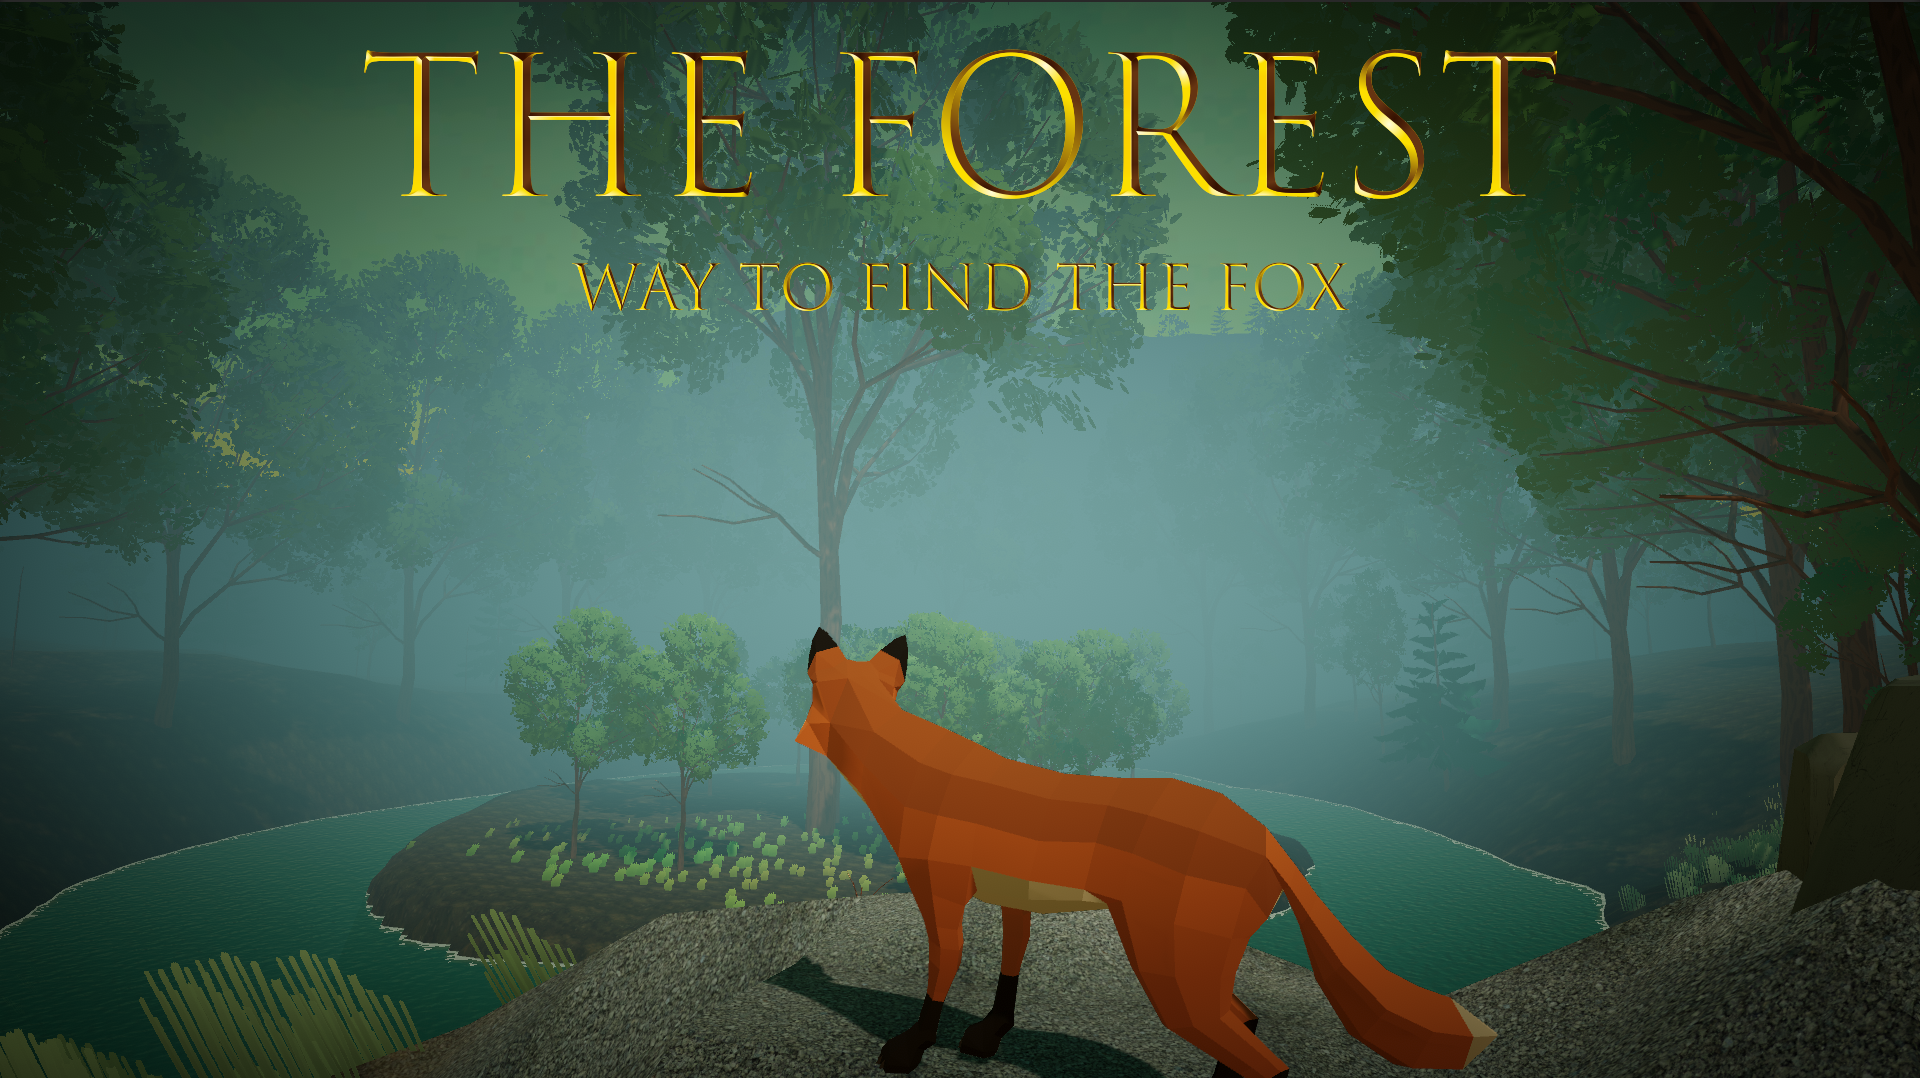 The Forest: Way to find the fox